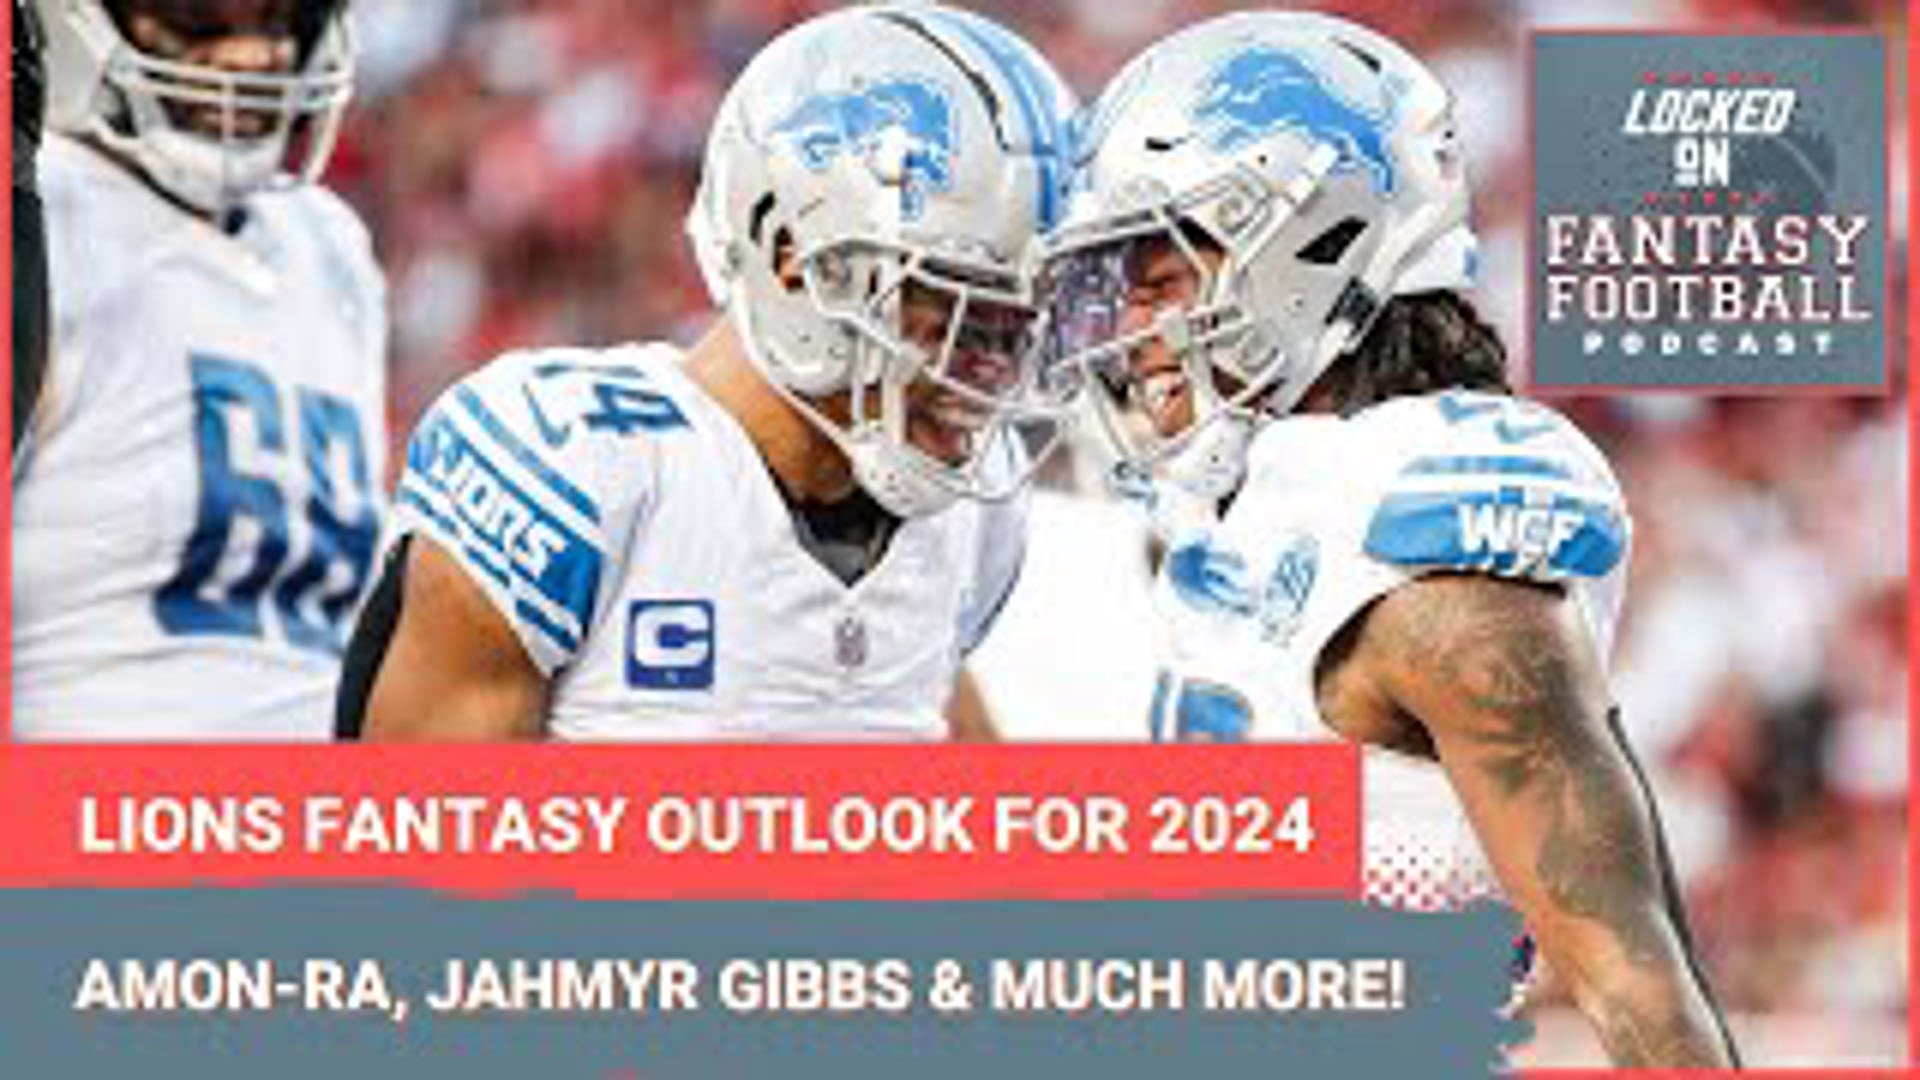 Sporting News.com's Vinnie Iyer and NFL.com's Michelle Magdziuk break down the fantasy football potential of the 2024 Detroit Lions.